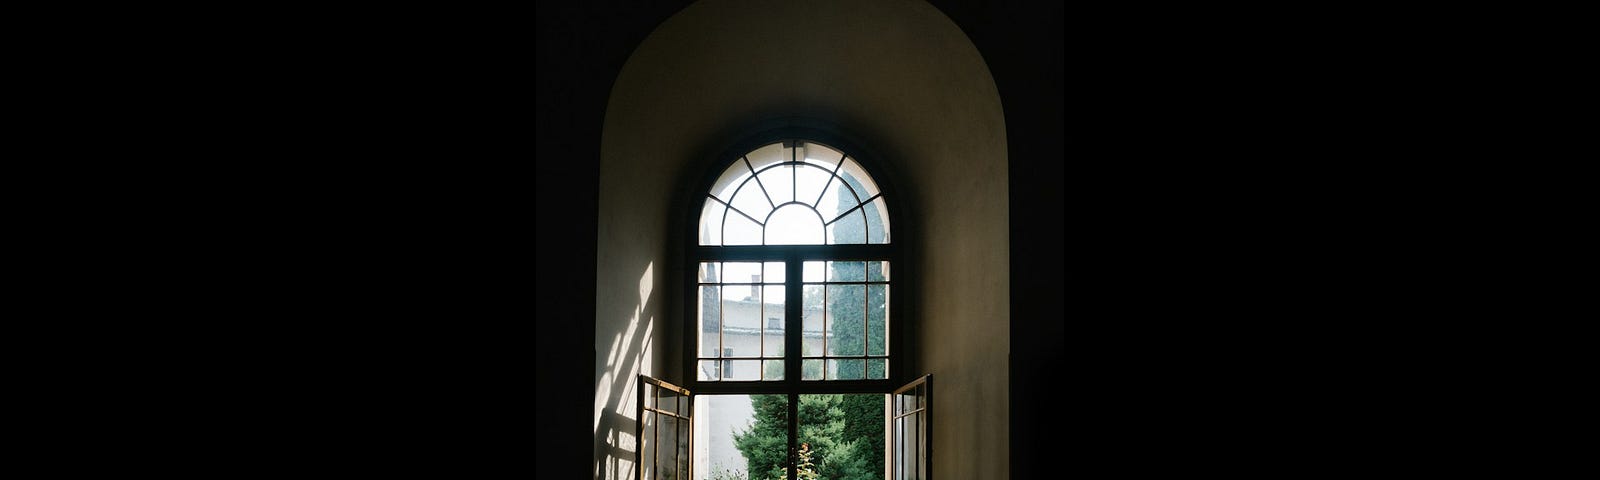 An open window letting light into a dark room